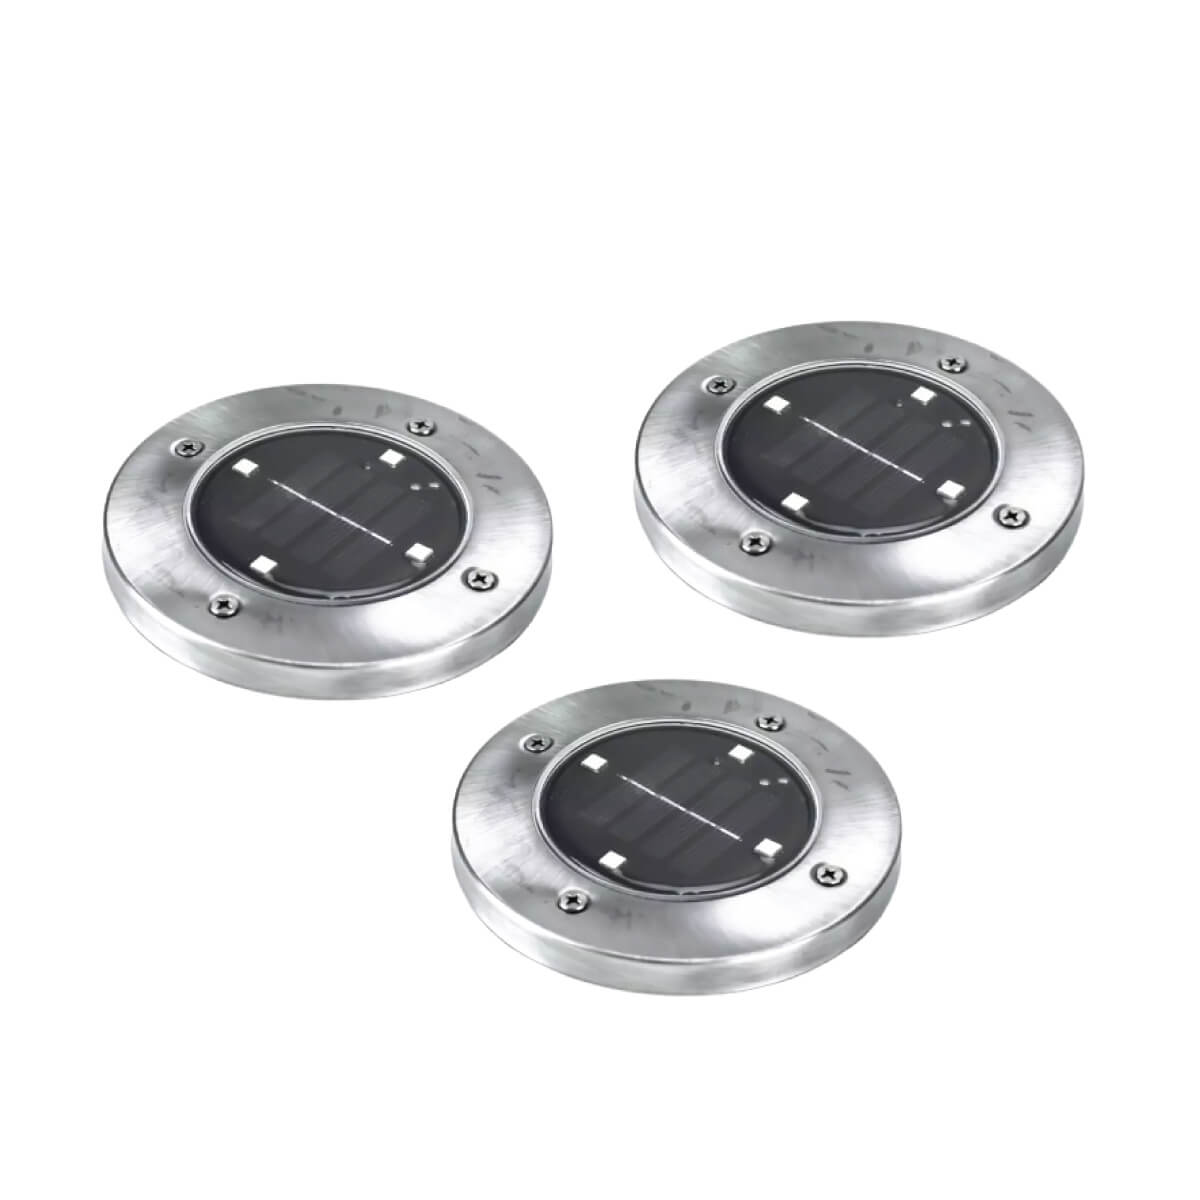 View Pack of 3 Cairns Stainless Steel LED Solar PathDeck Lights information